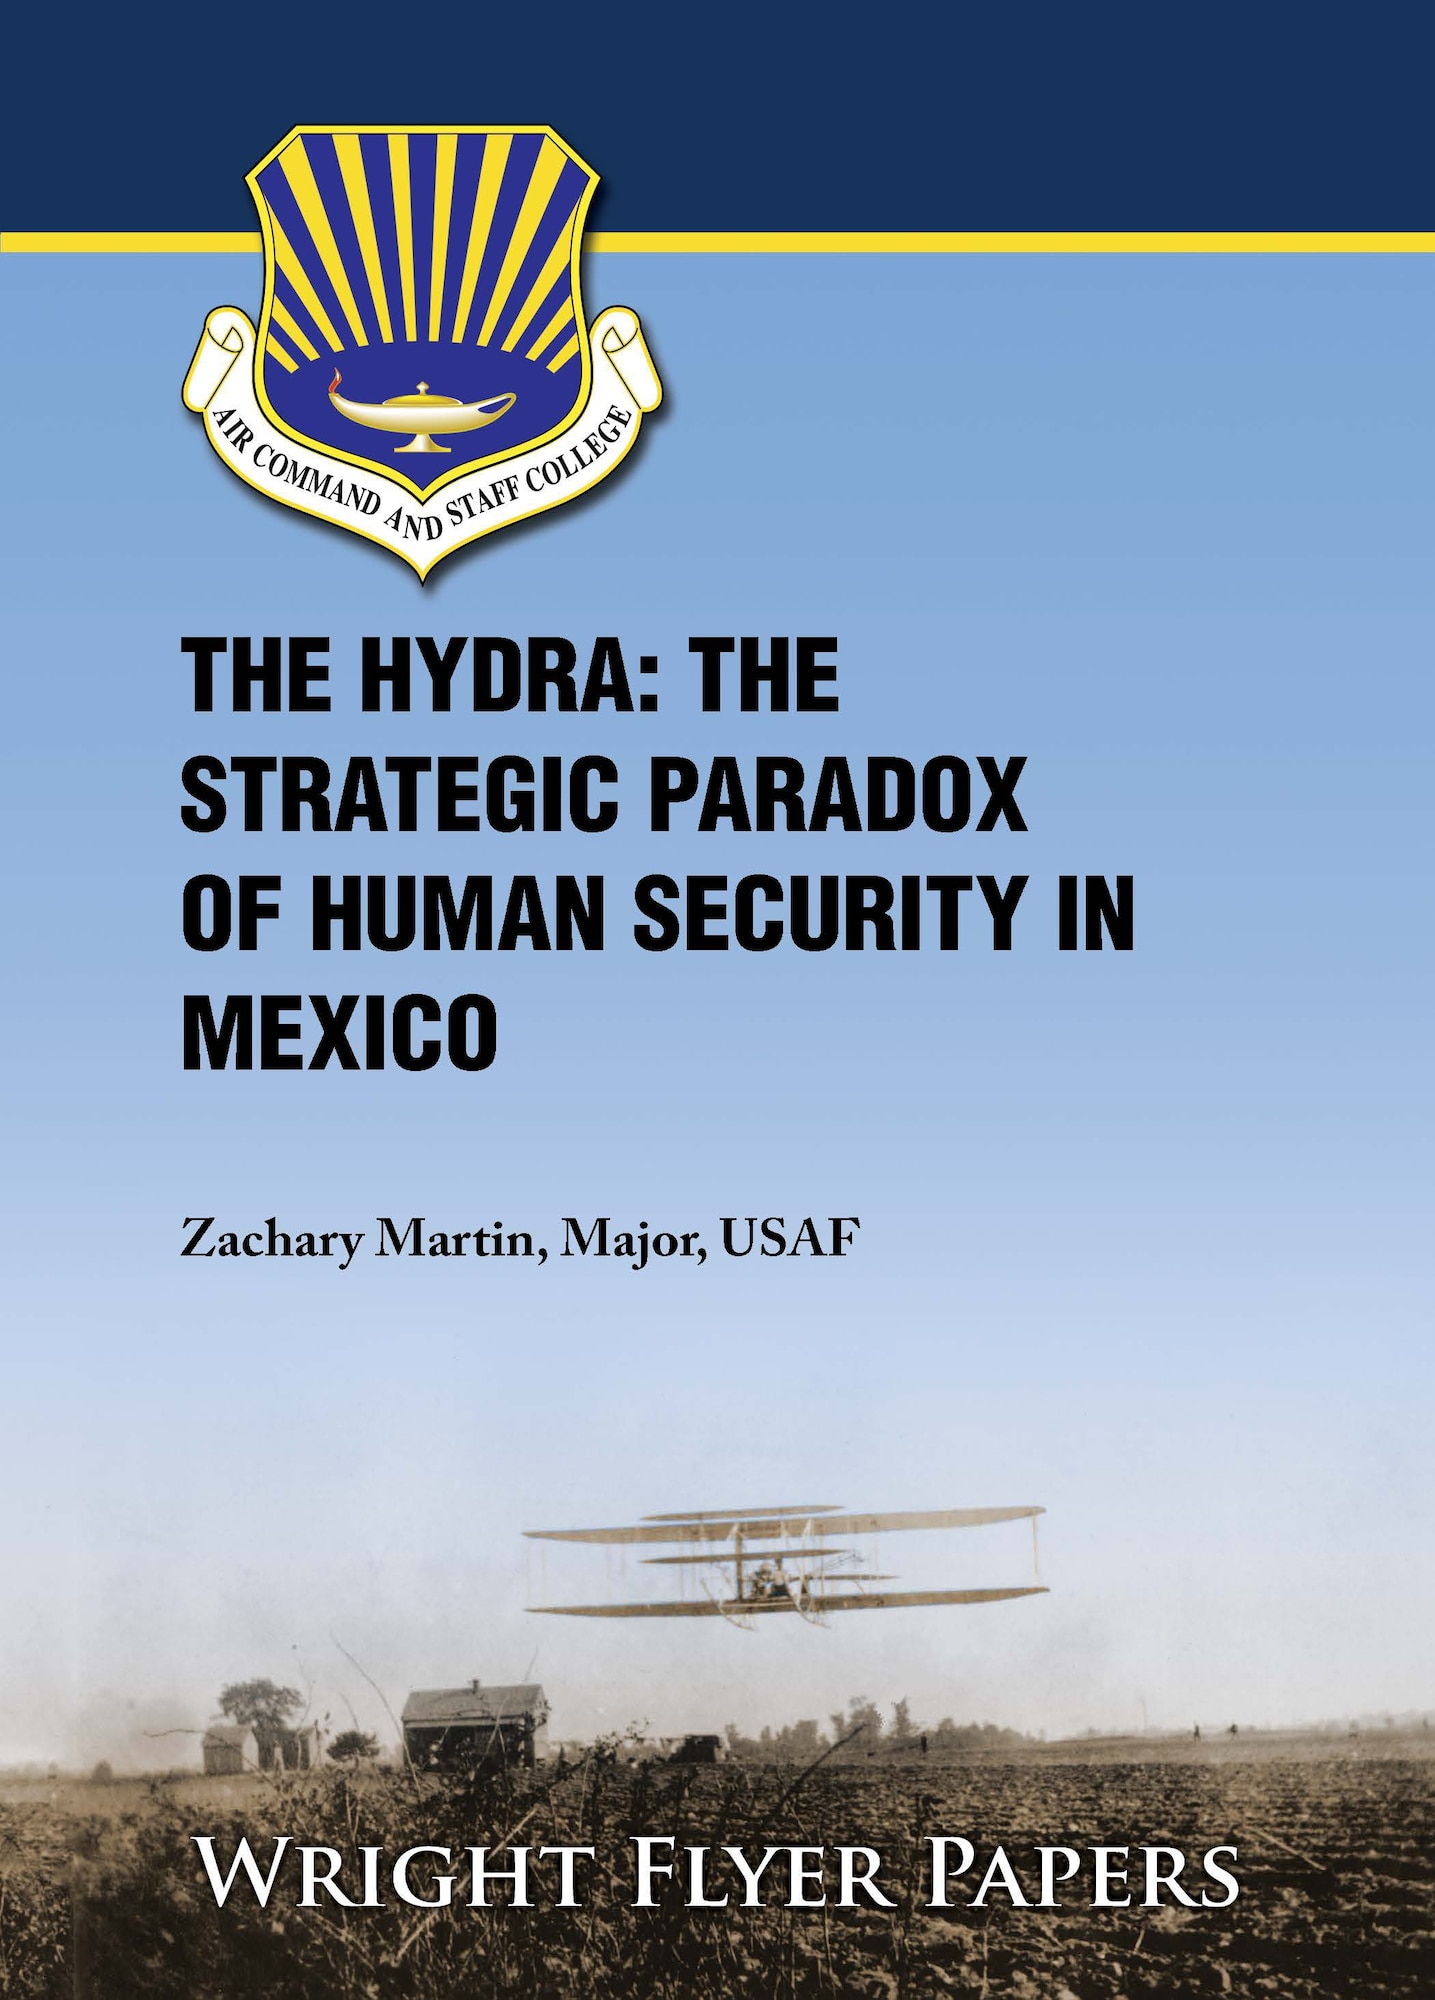 The Hydra: The Strategic Paradox of Human Security in Mexico